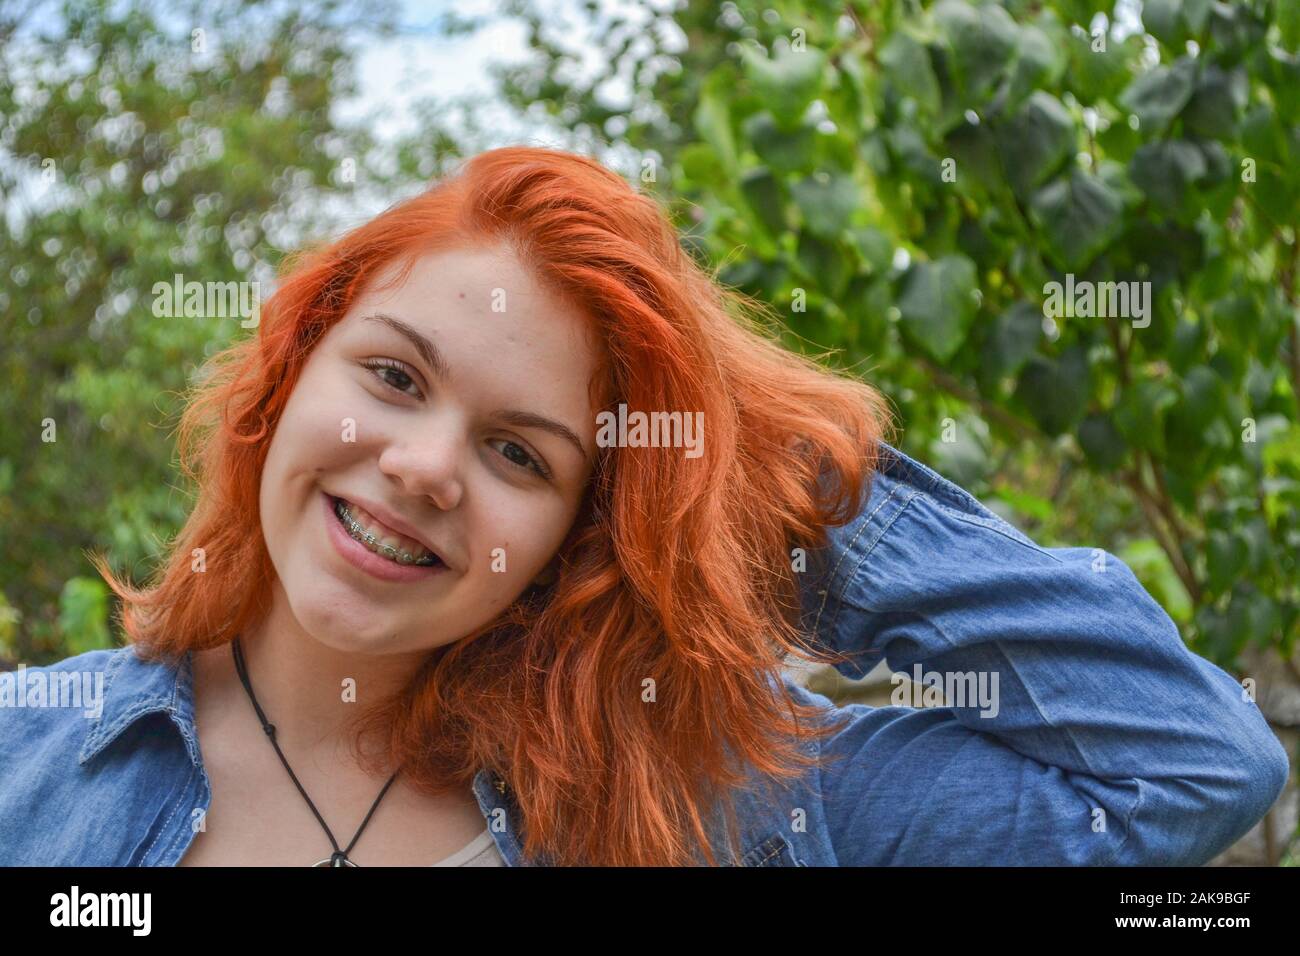 Girl with dental braces, dyed her brown hair orange for the first time Stock Photo